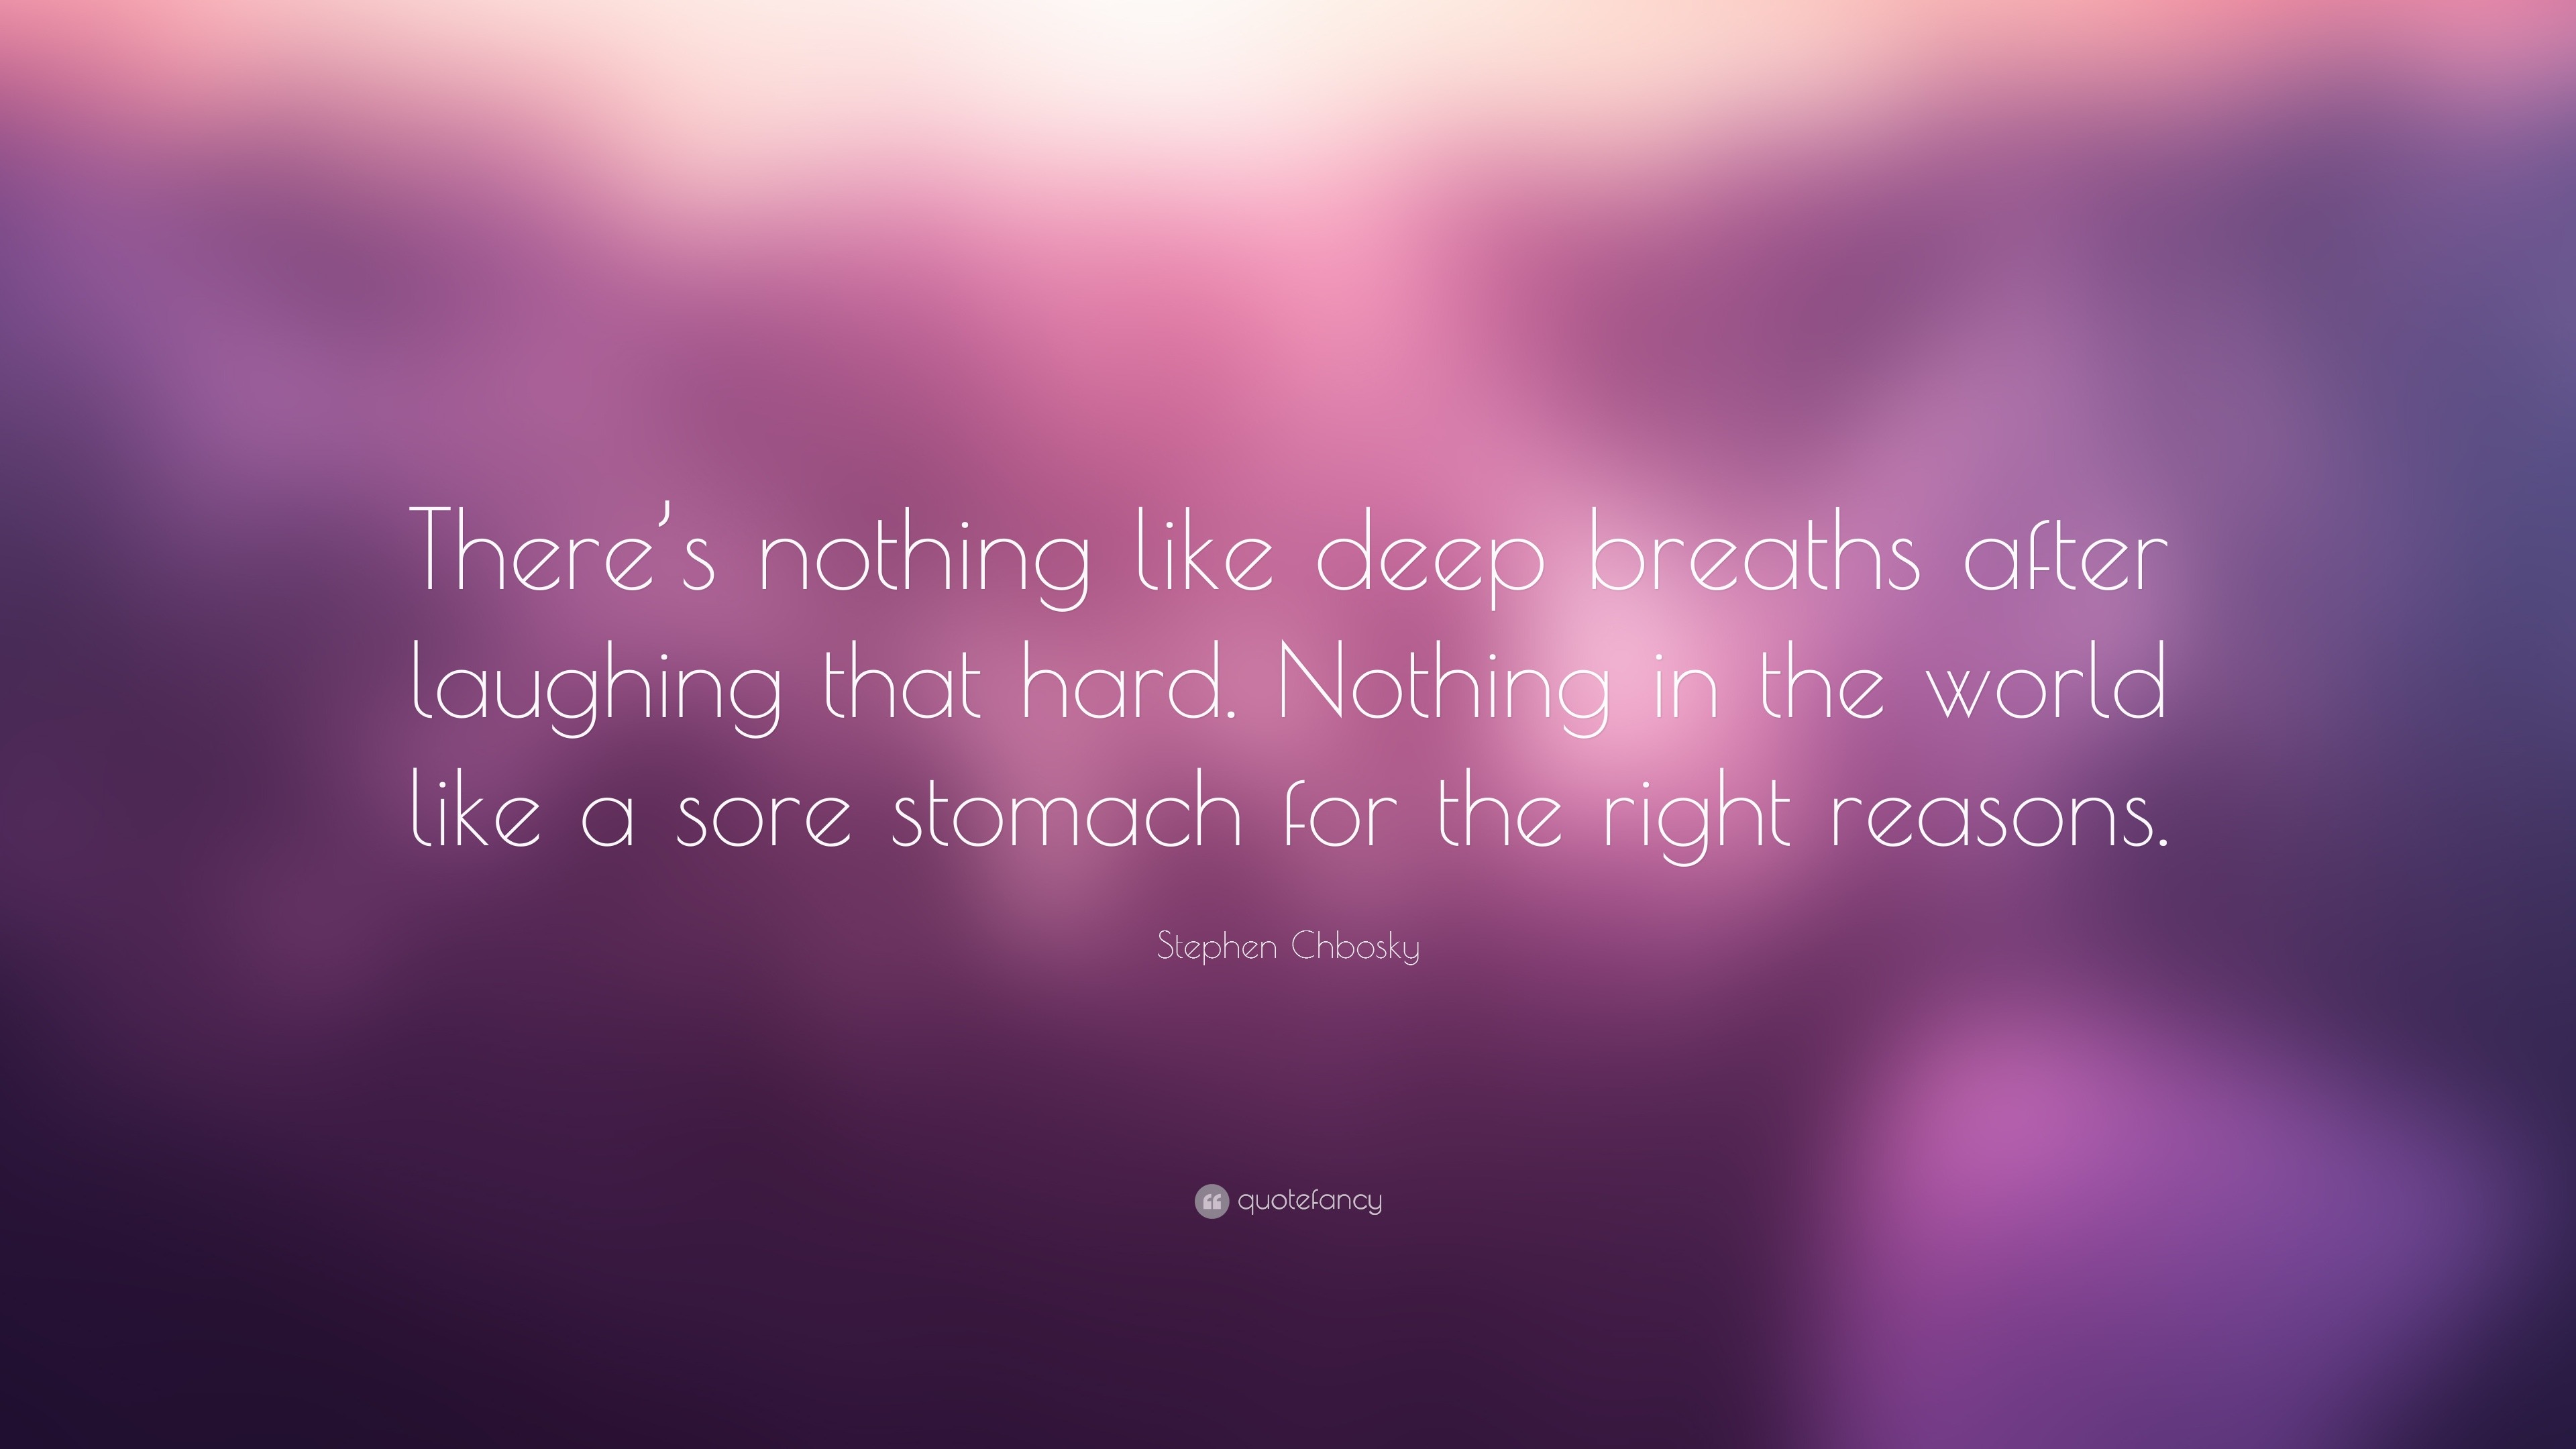 Stephen Chbosky Quote “There s nothing like deep breaths after laughing that hard Nothing